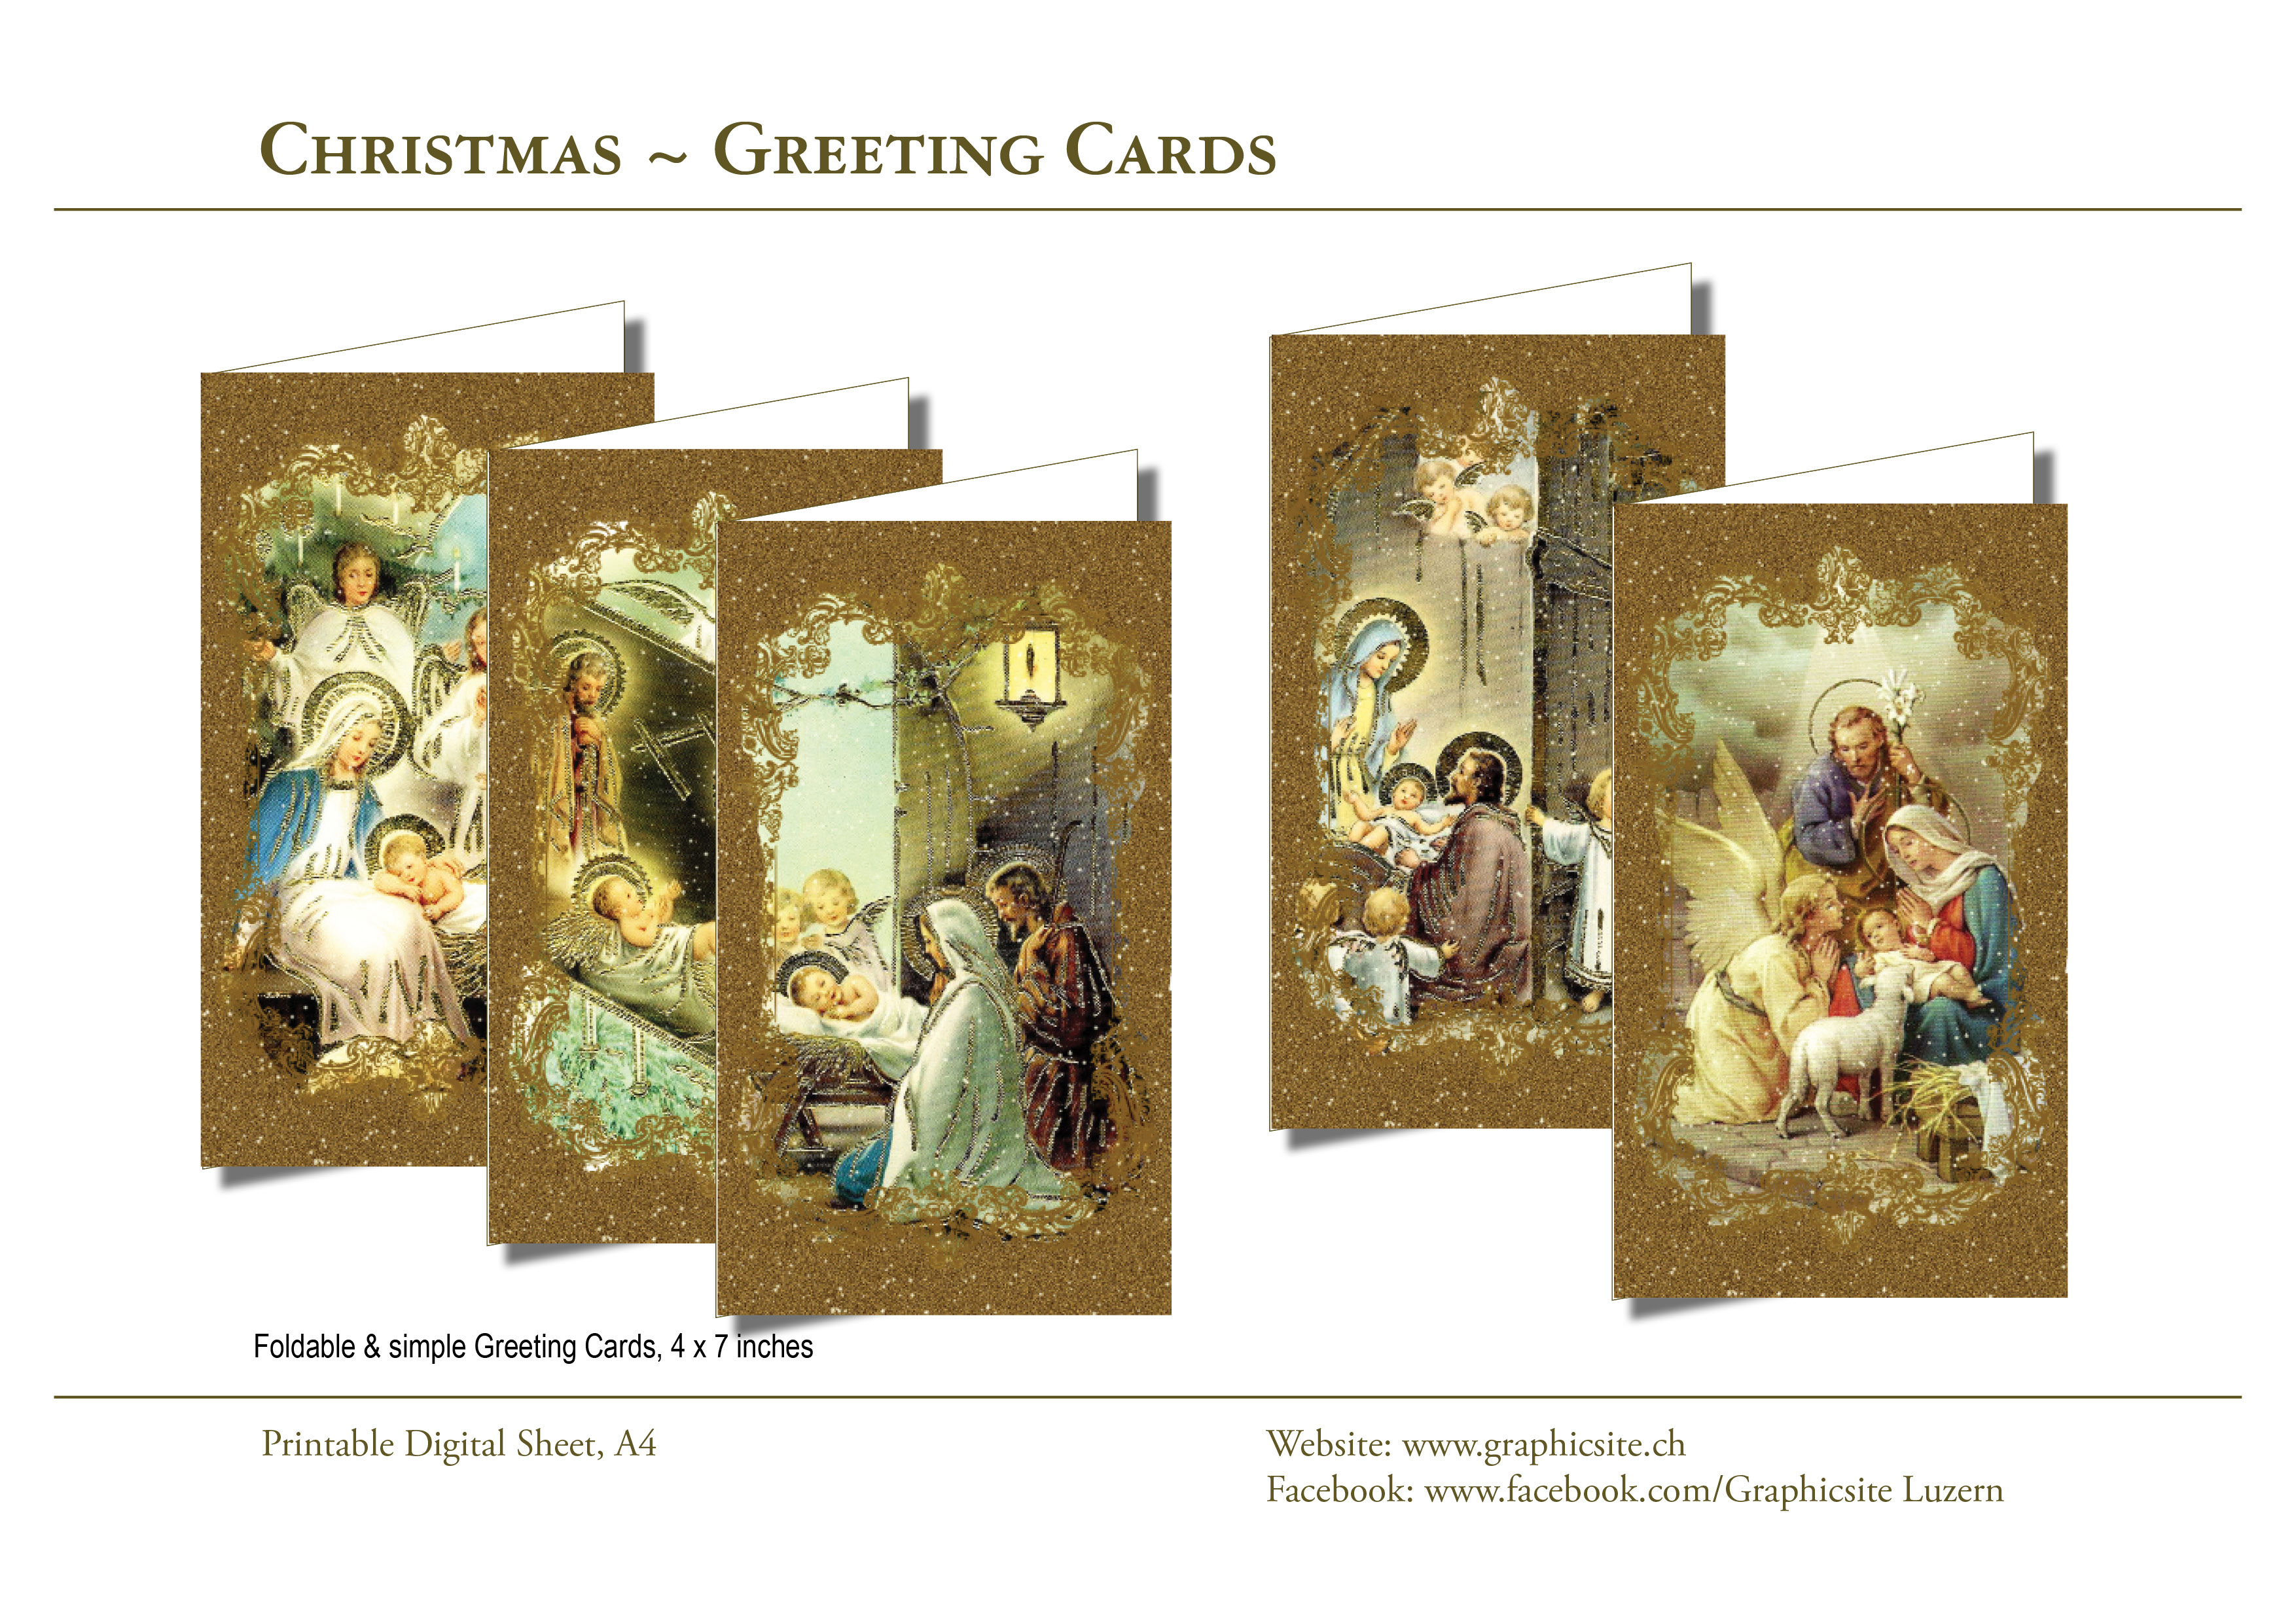 Printable Digital Sheets - Greeting Cards, Christmas Cards, Holy Family, Seasons Greetings - Envelope - Cards - Graphic Design - Luzern, Schweiz